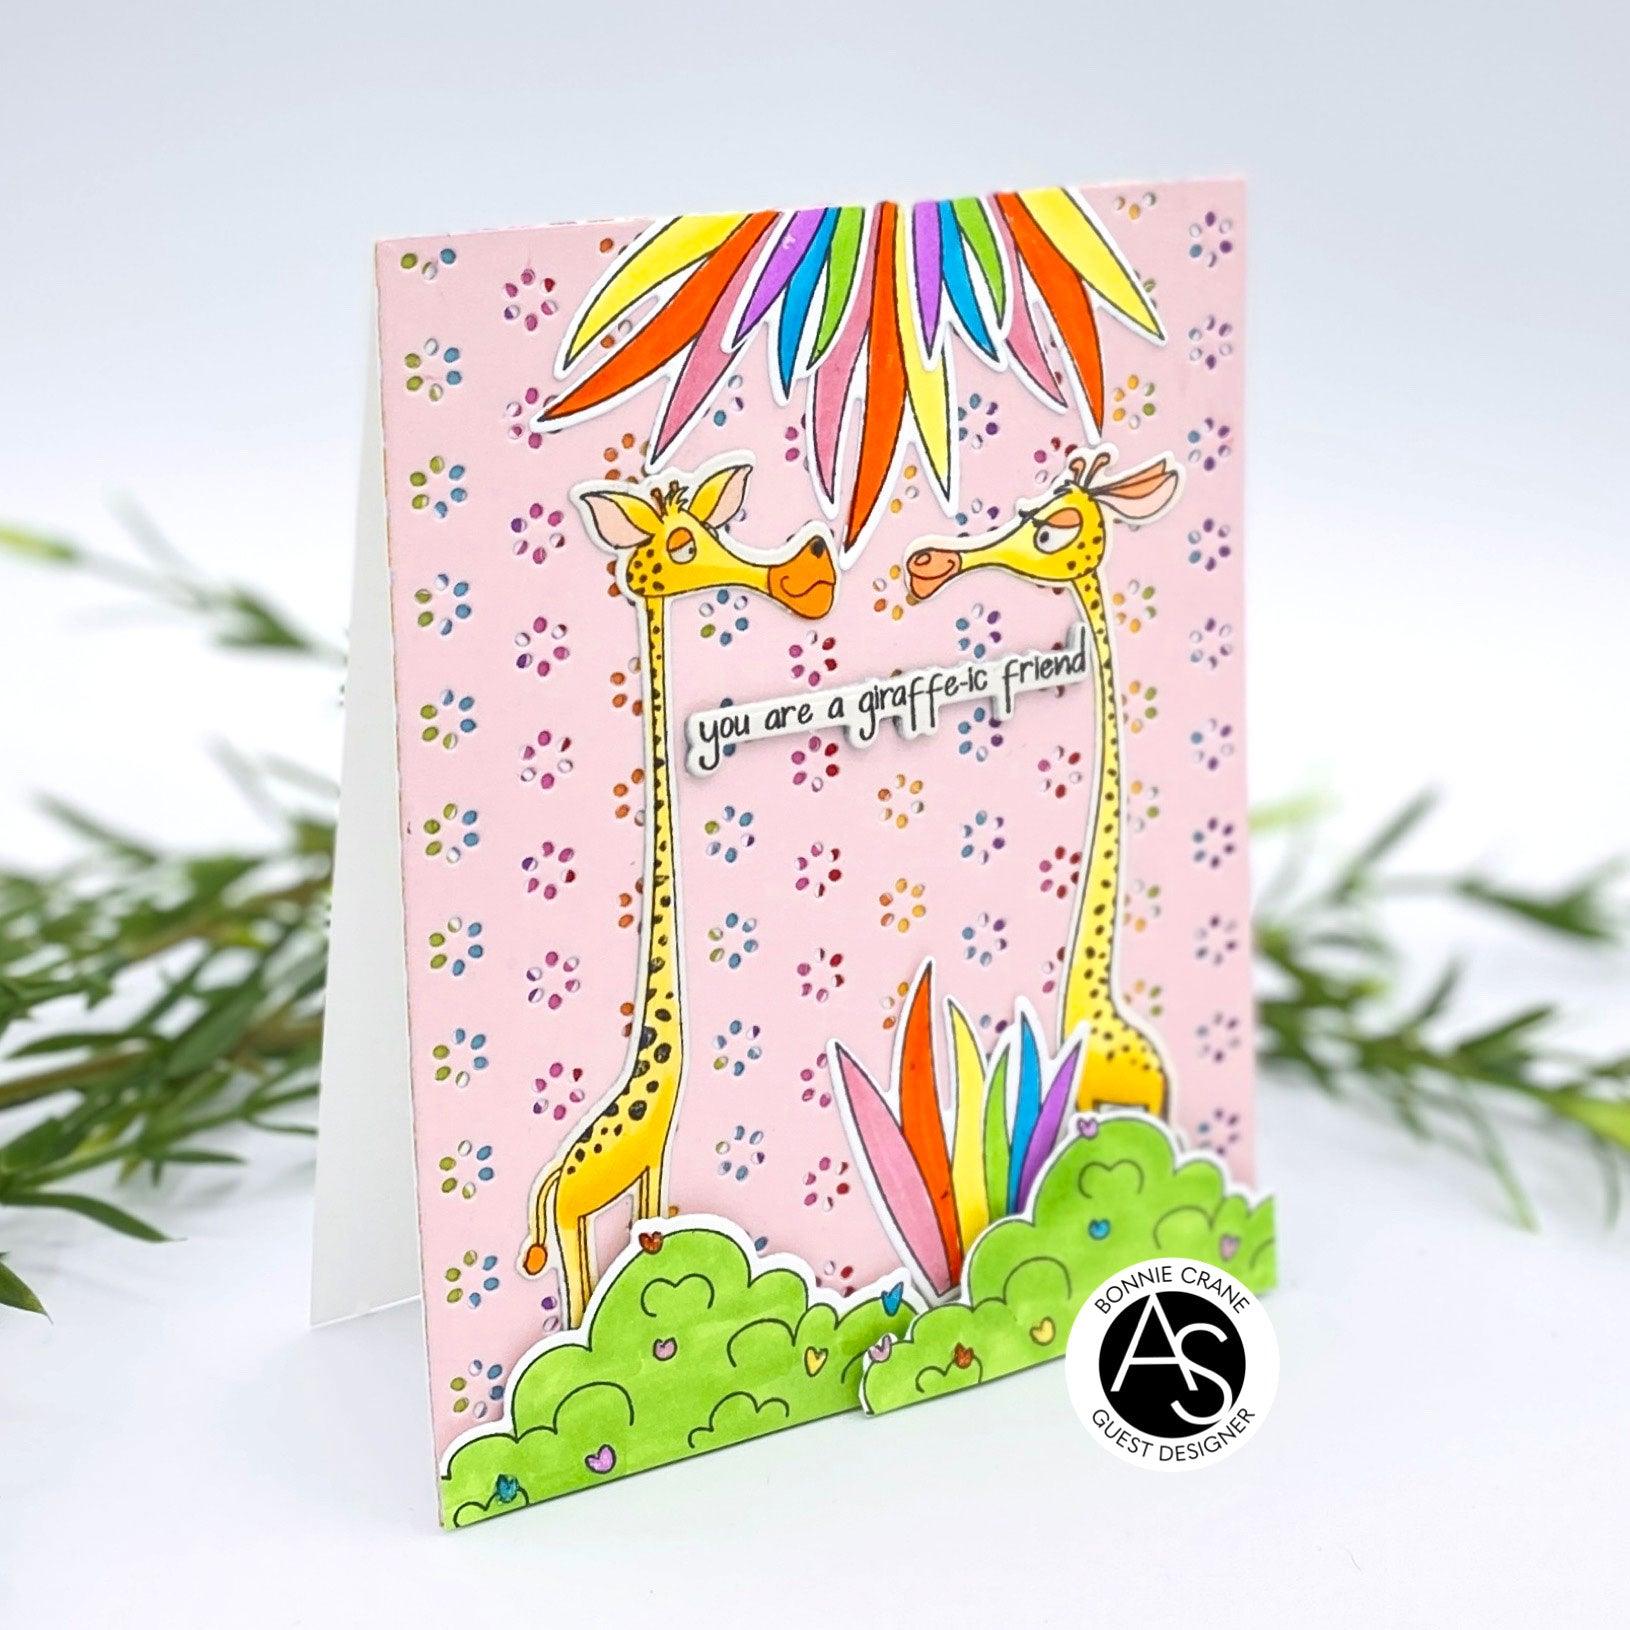 giraffe-stamp-love-you-friends-cardmaking-sentiments-alex-syberia-designs-coloring-valentine-stamps-love-friends-tiny-flowers-cover-die